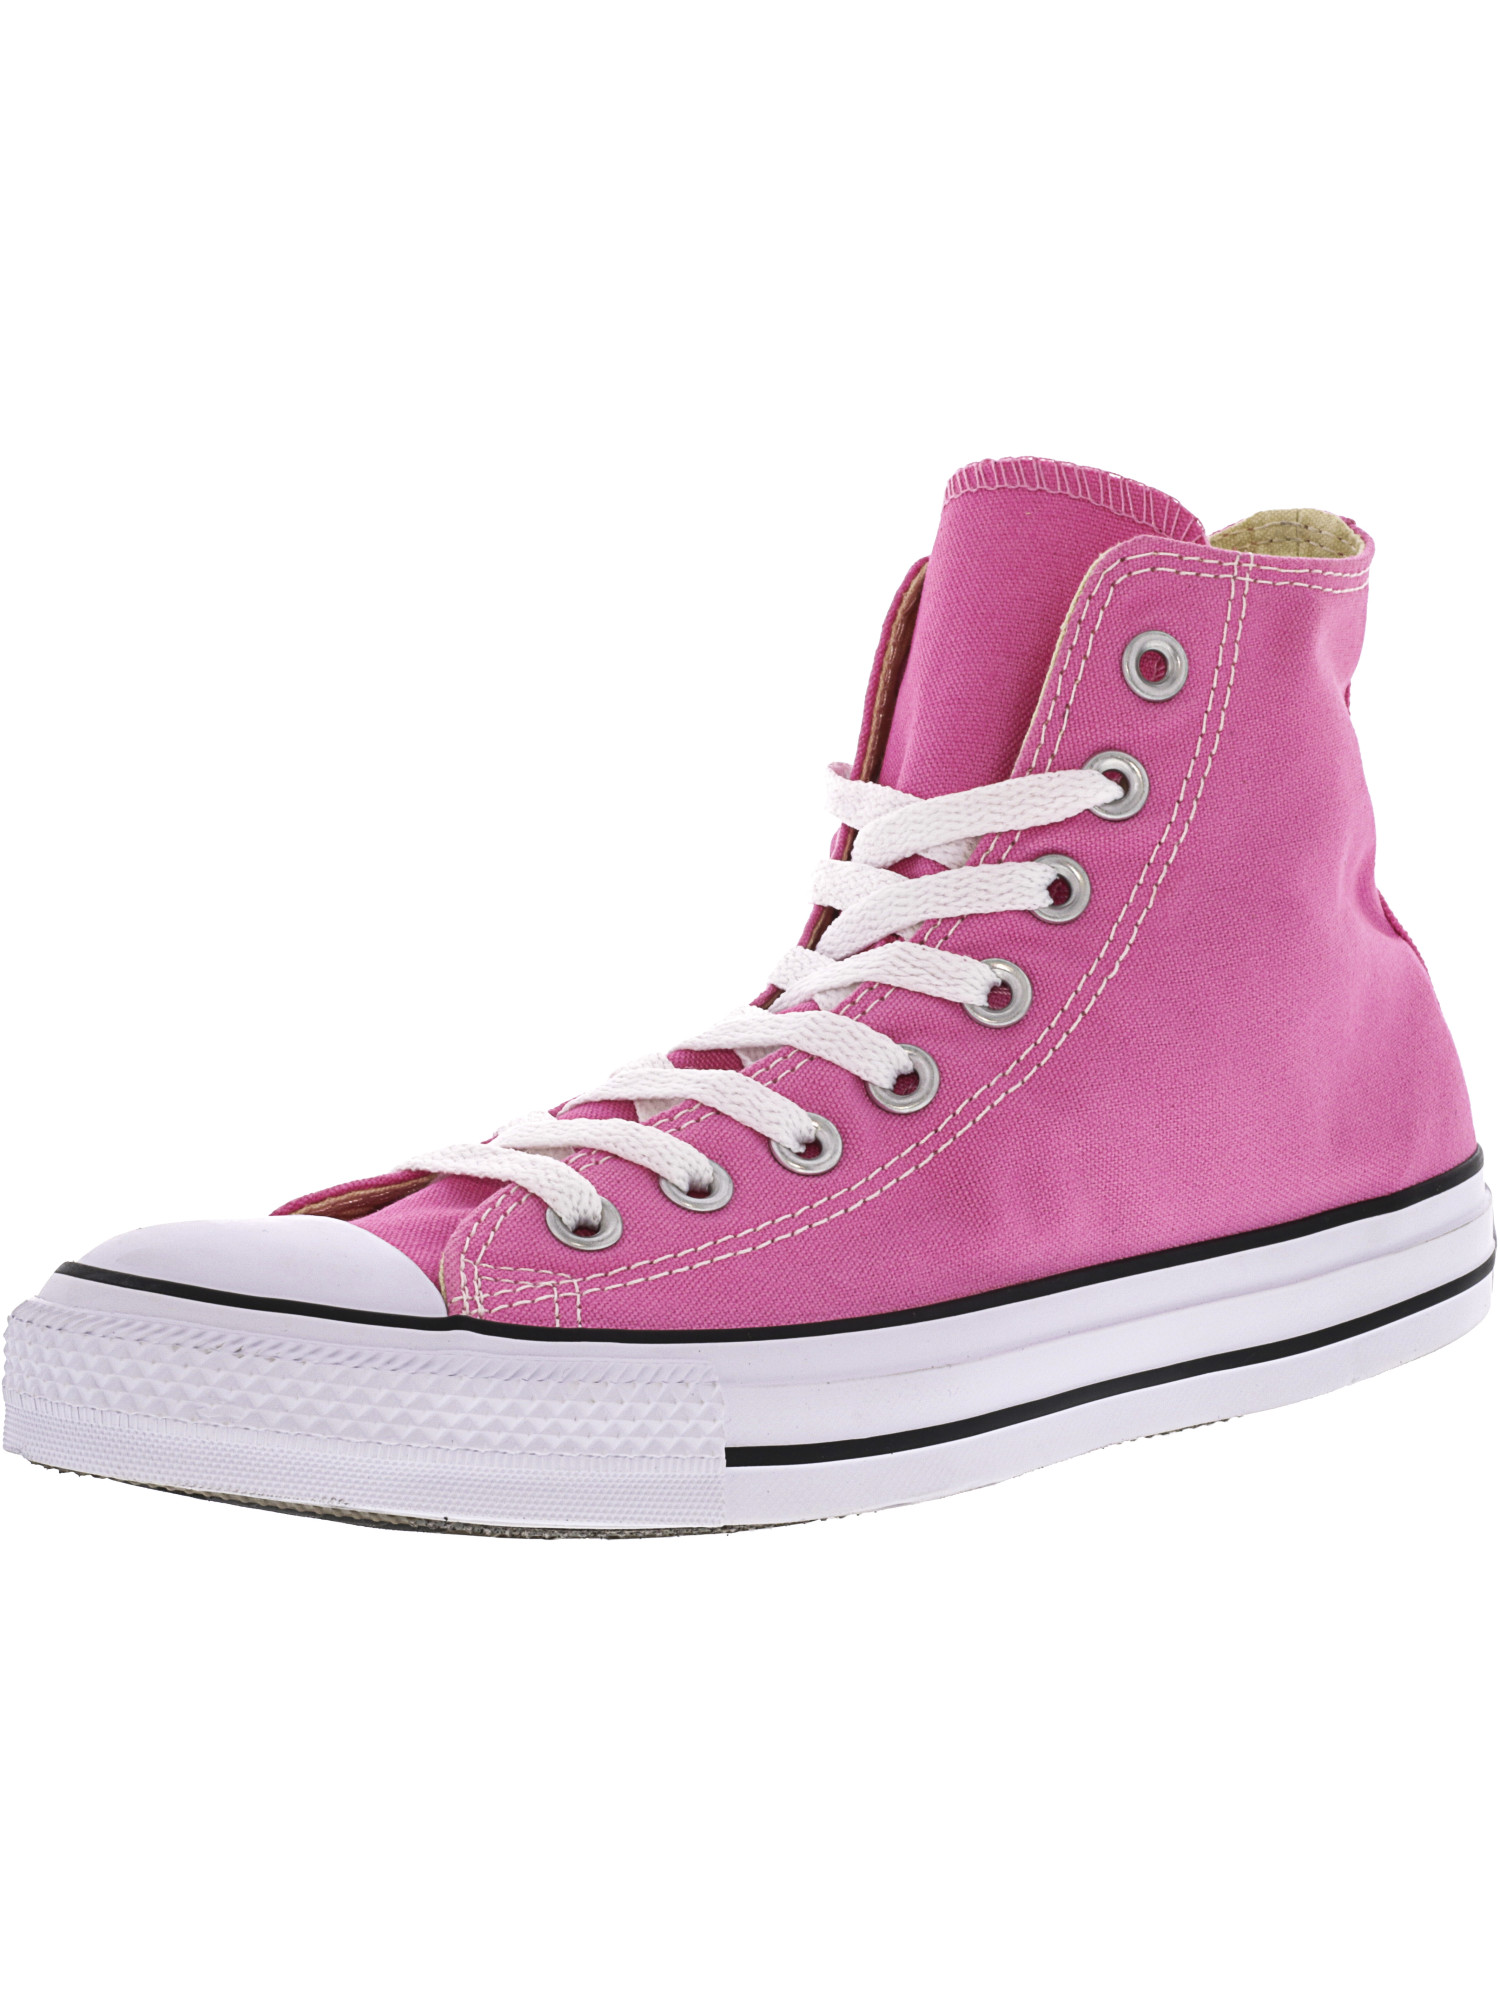 Converse Chuck Taylor All Star Hi Pink High-Top Fashion Sneaker - 6.5M / 4.5M - image 1 of 10